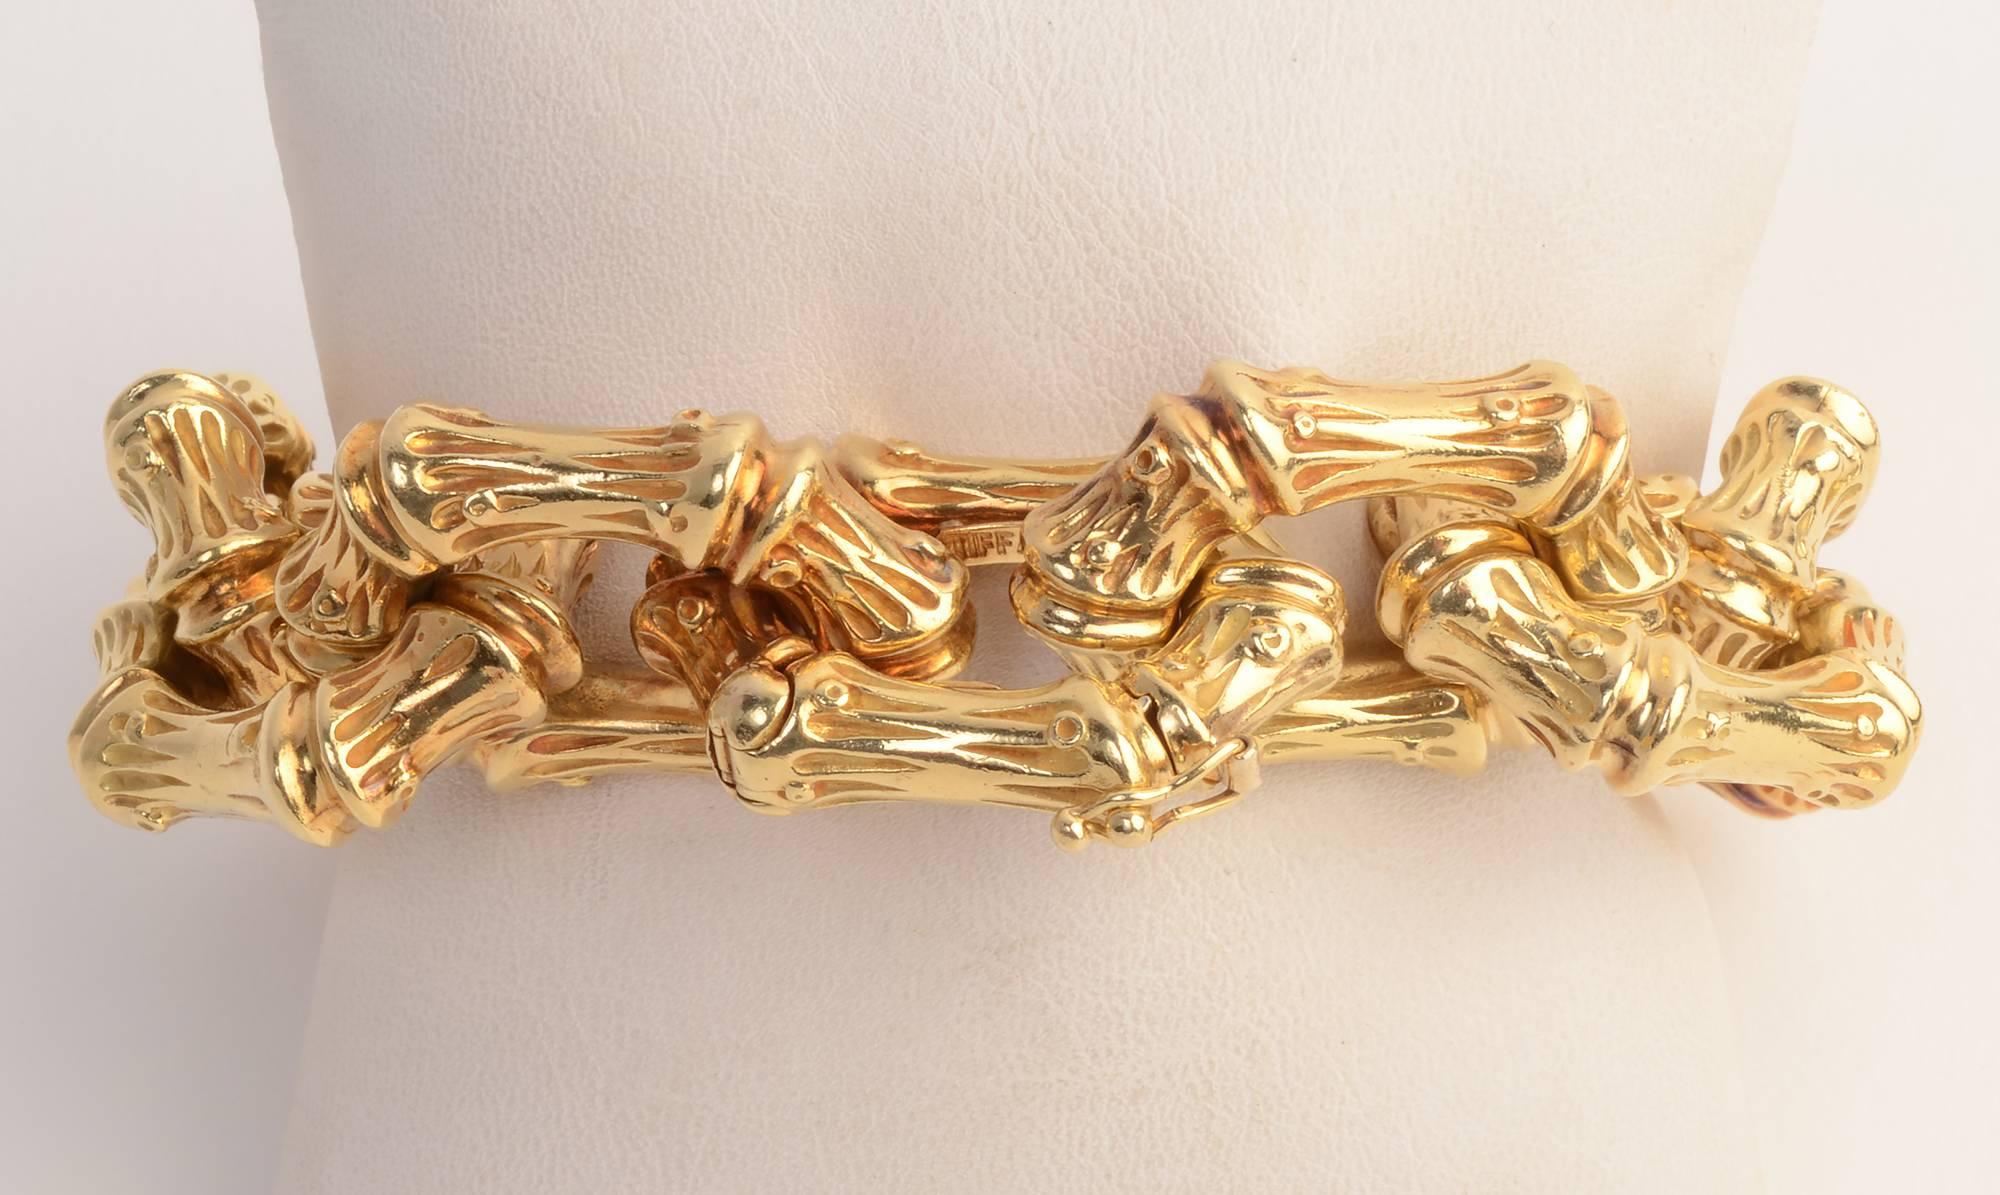 Extremely striking bamboo design bracelet by Tiffany in 18 karat gold. The bracelet weighs a stunning 183 grams. The links are 1 inch in diameter and 1 1/4 inches in length.The 8 1/2 inch length is deceiving. Because the links are so large, they